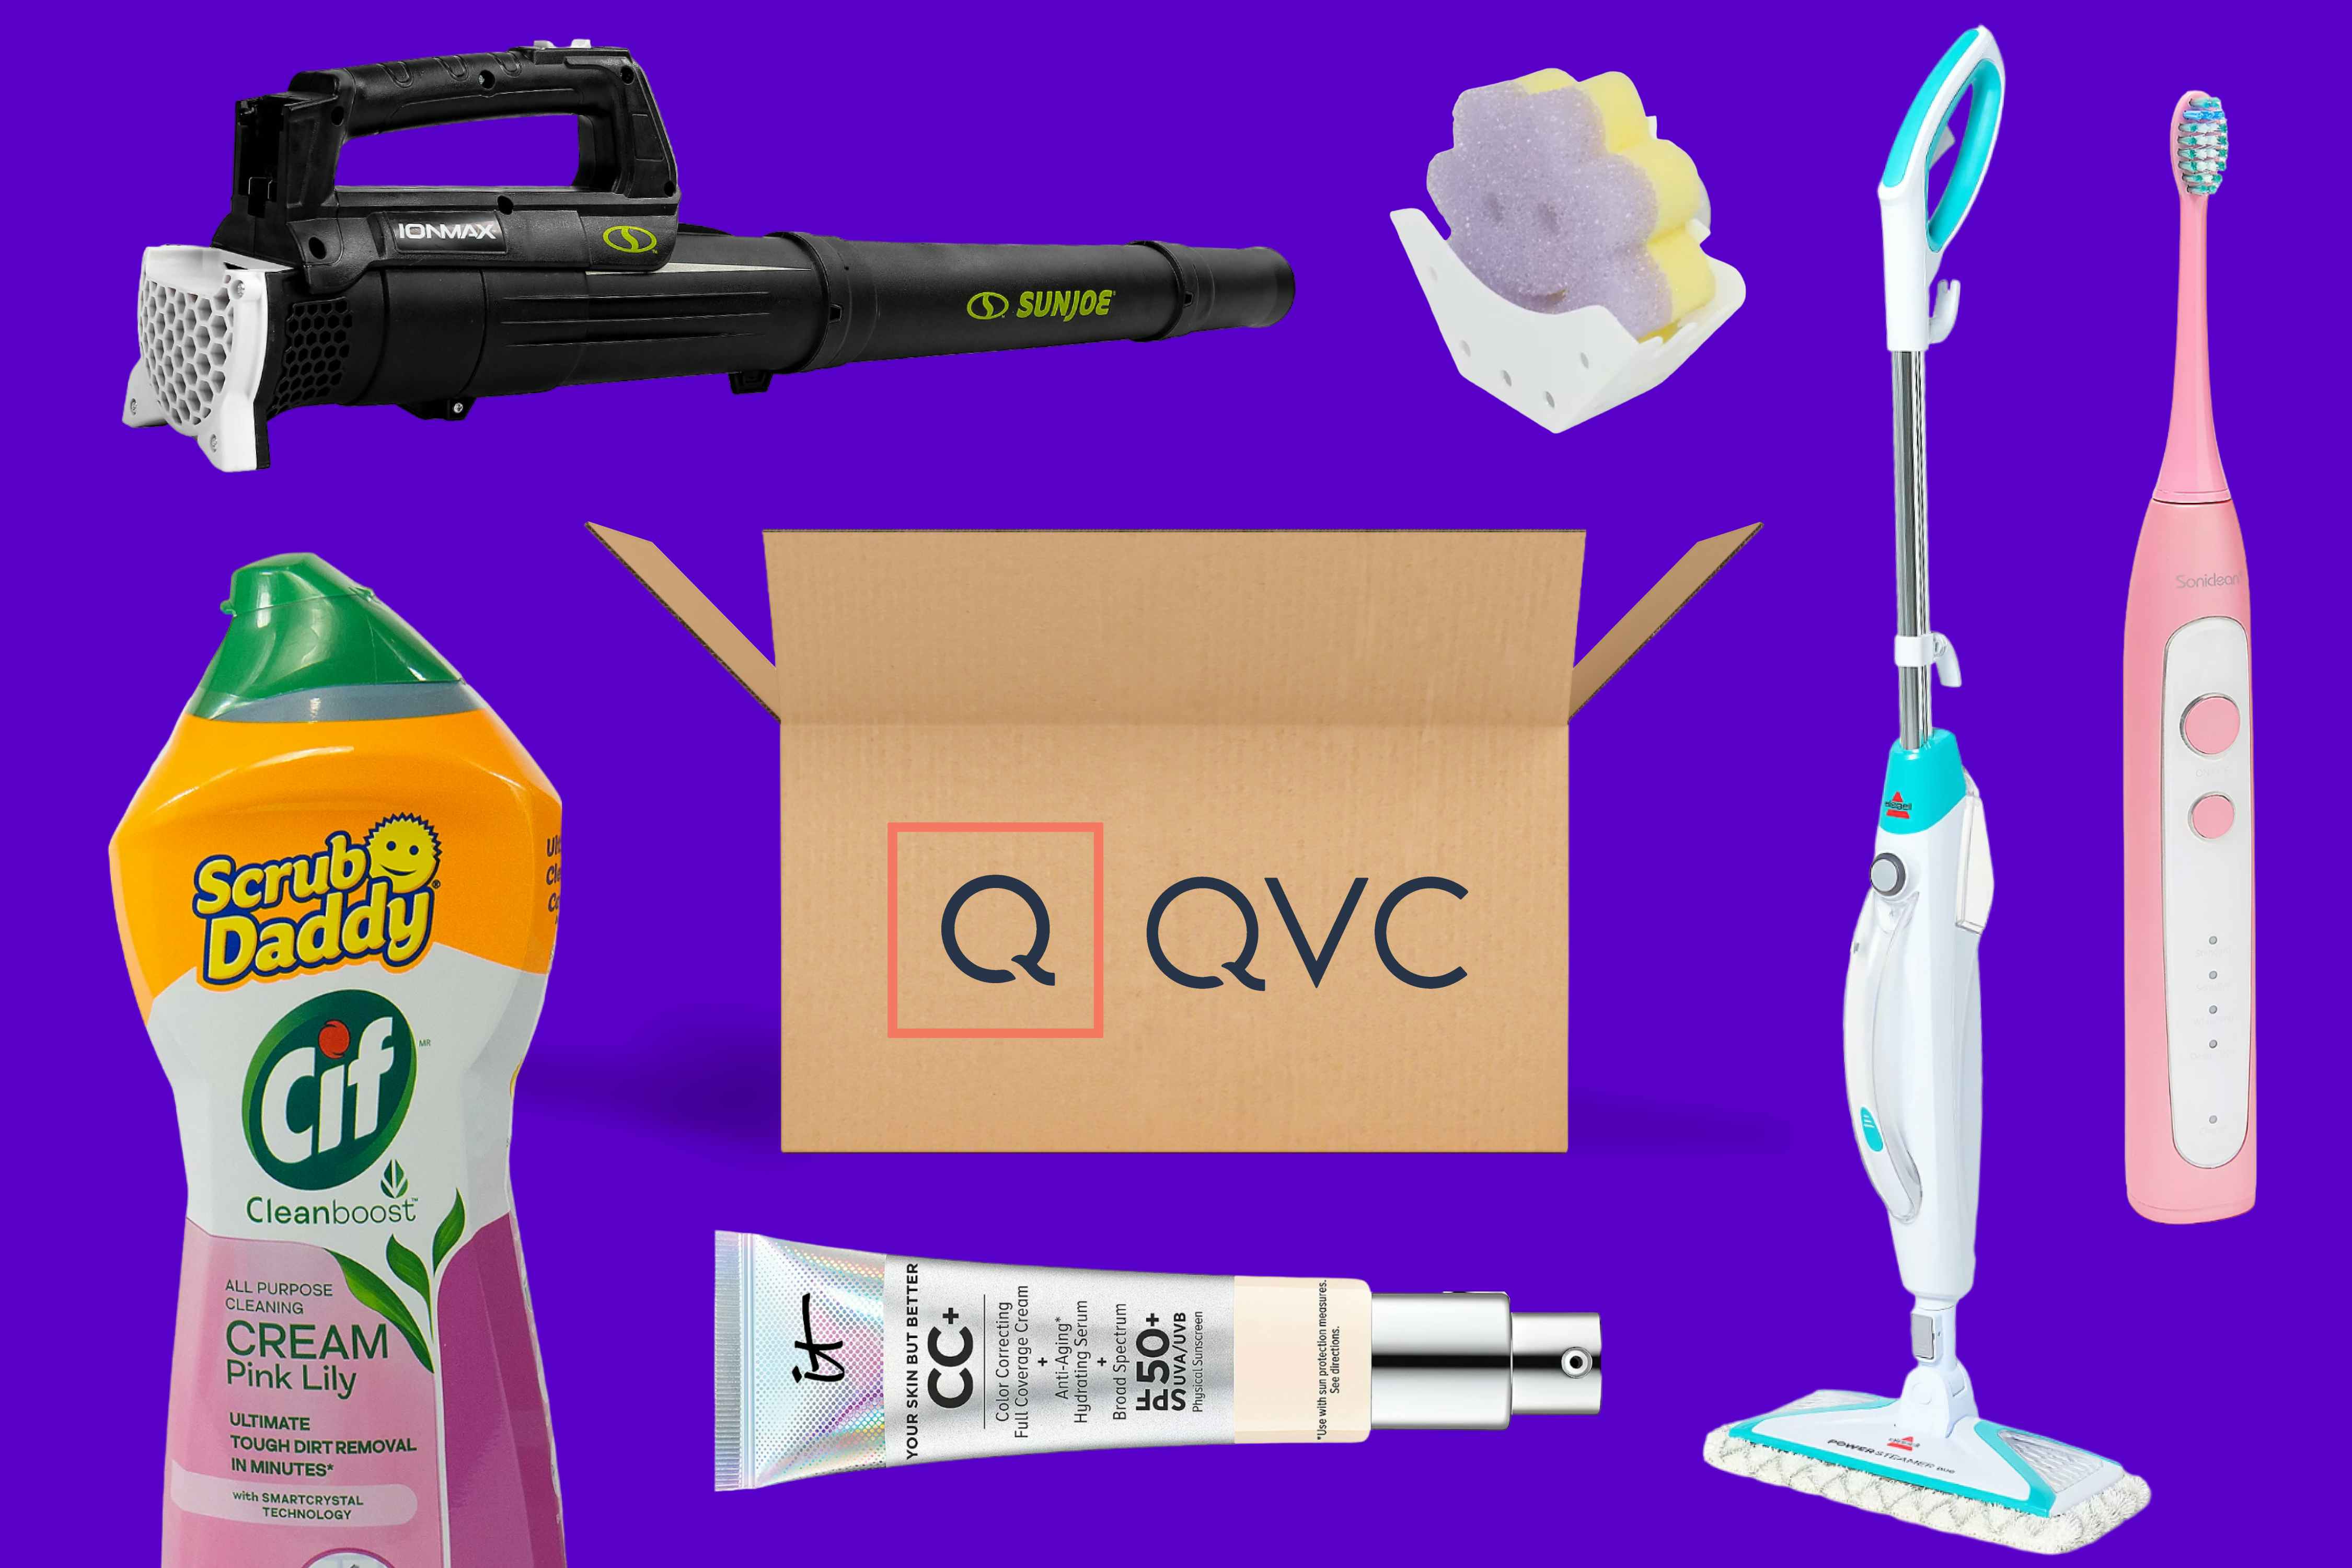 Bissell Mop, Cheap Plants, and More: 18 Things to Shop at QVC's F&F Sale